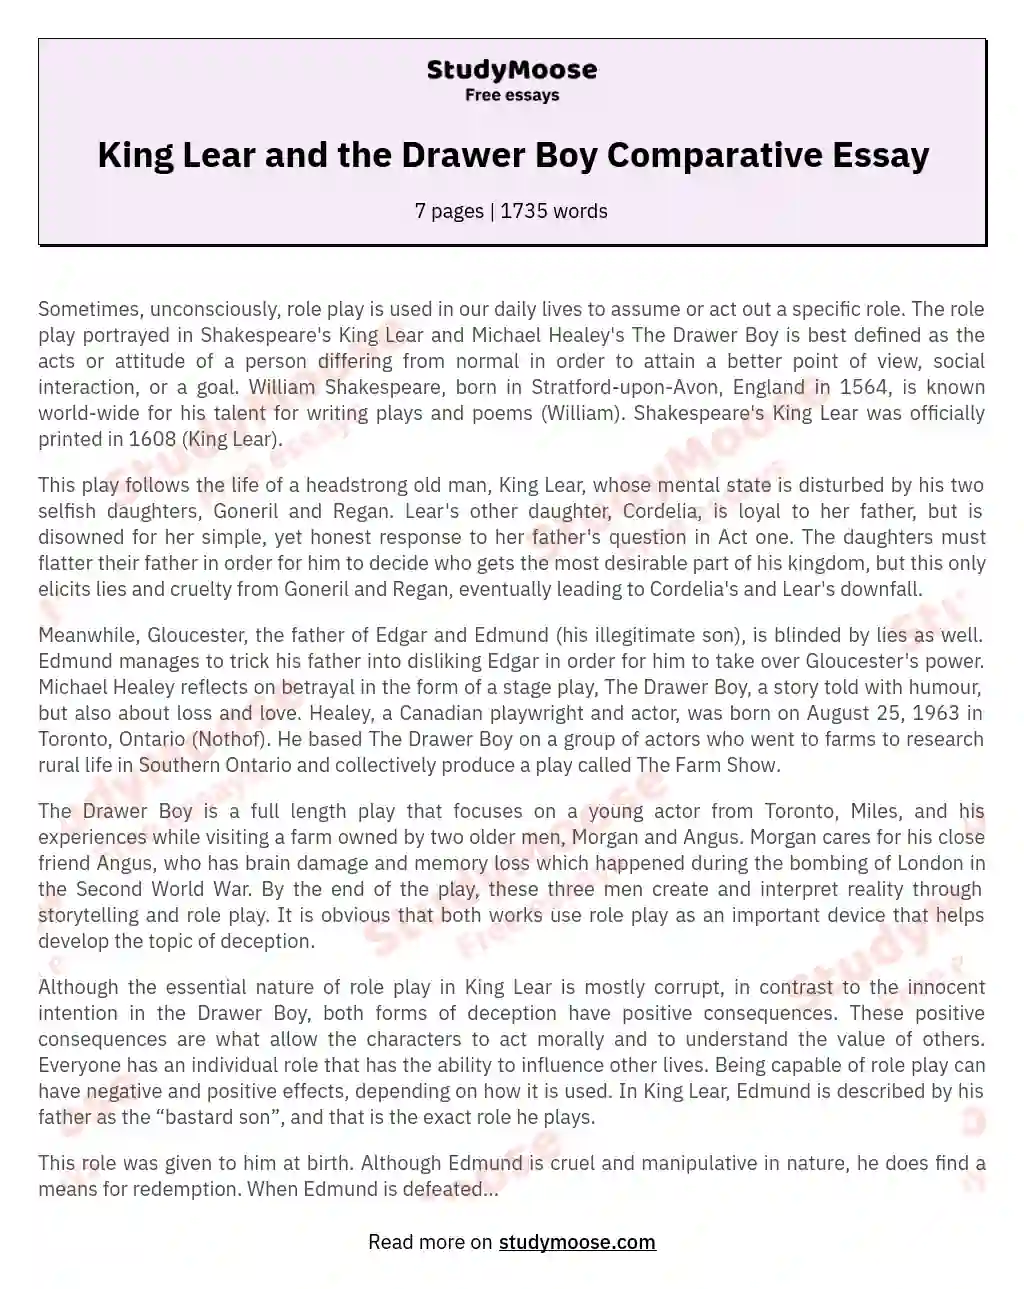 King Lear and the Drawer Boy Comparative Essay essay